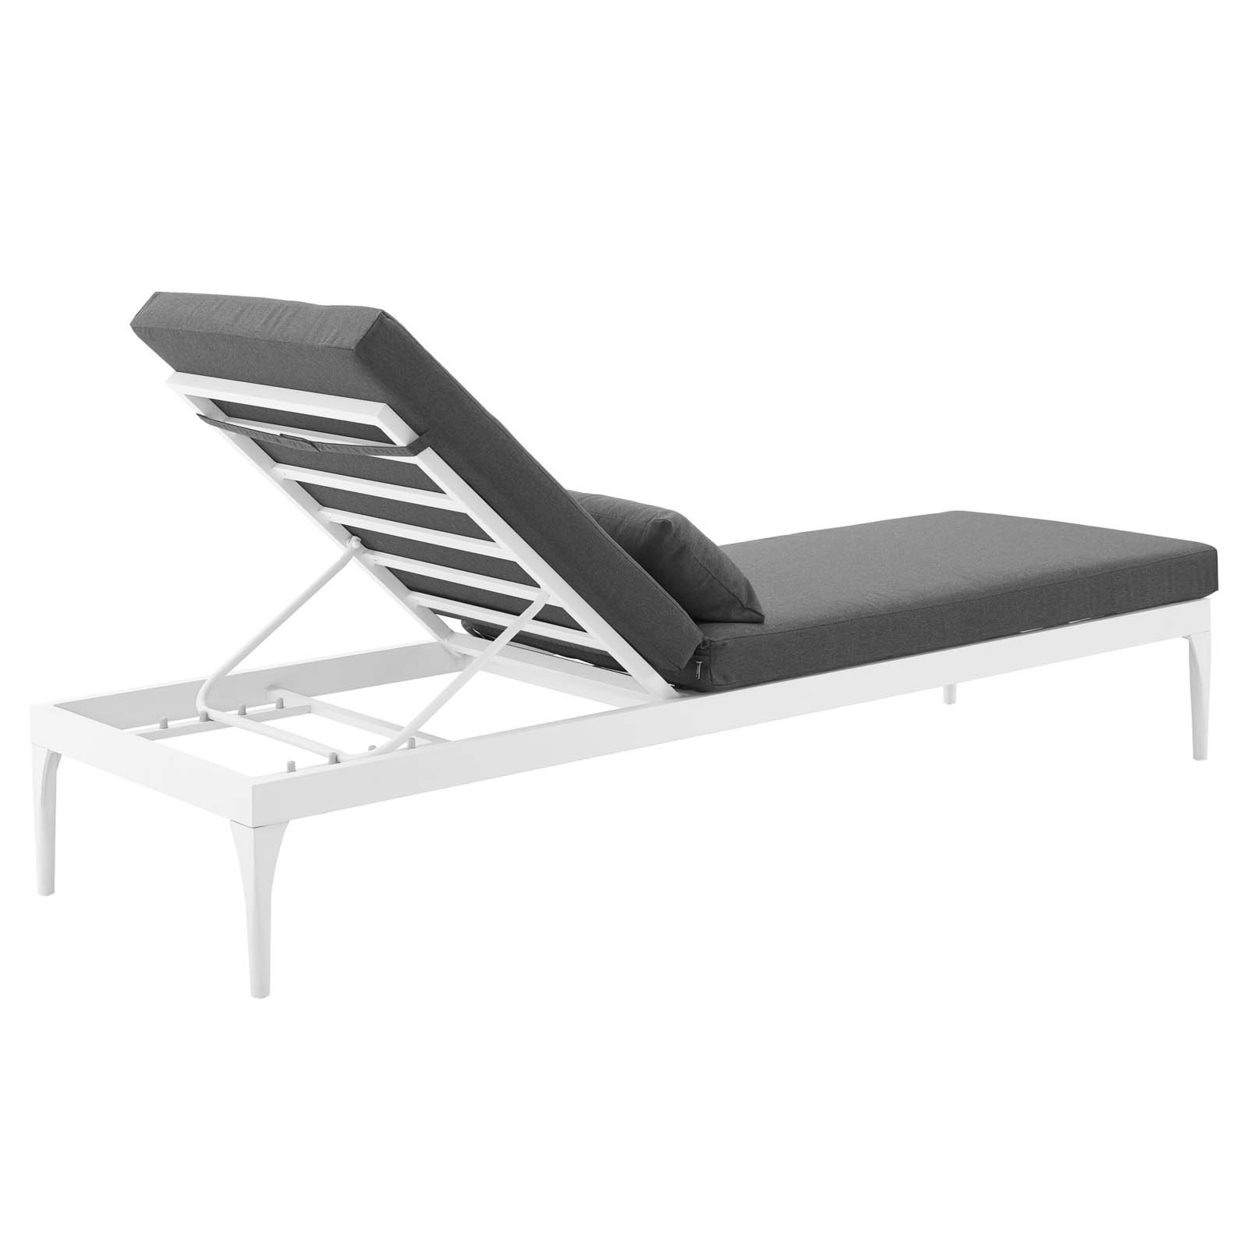 Perspective Cushion Outdoor Patio Chaise Lounge Chair (3301-WHI-CHA)